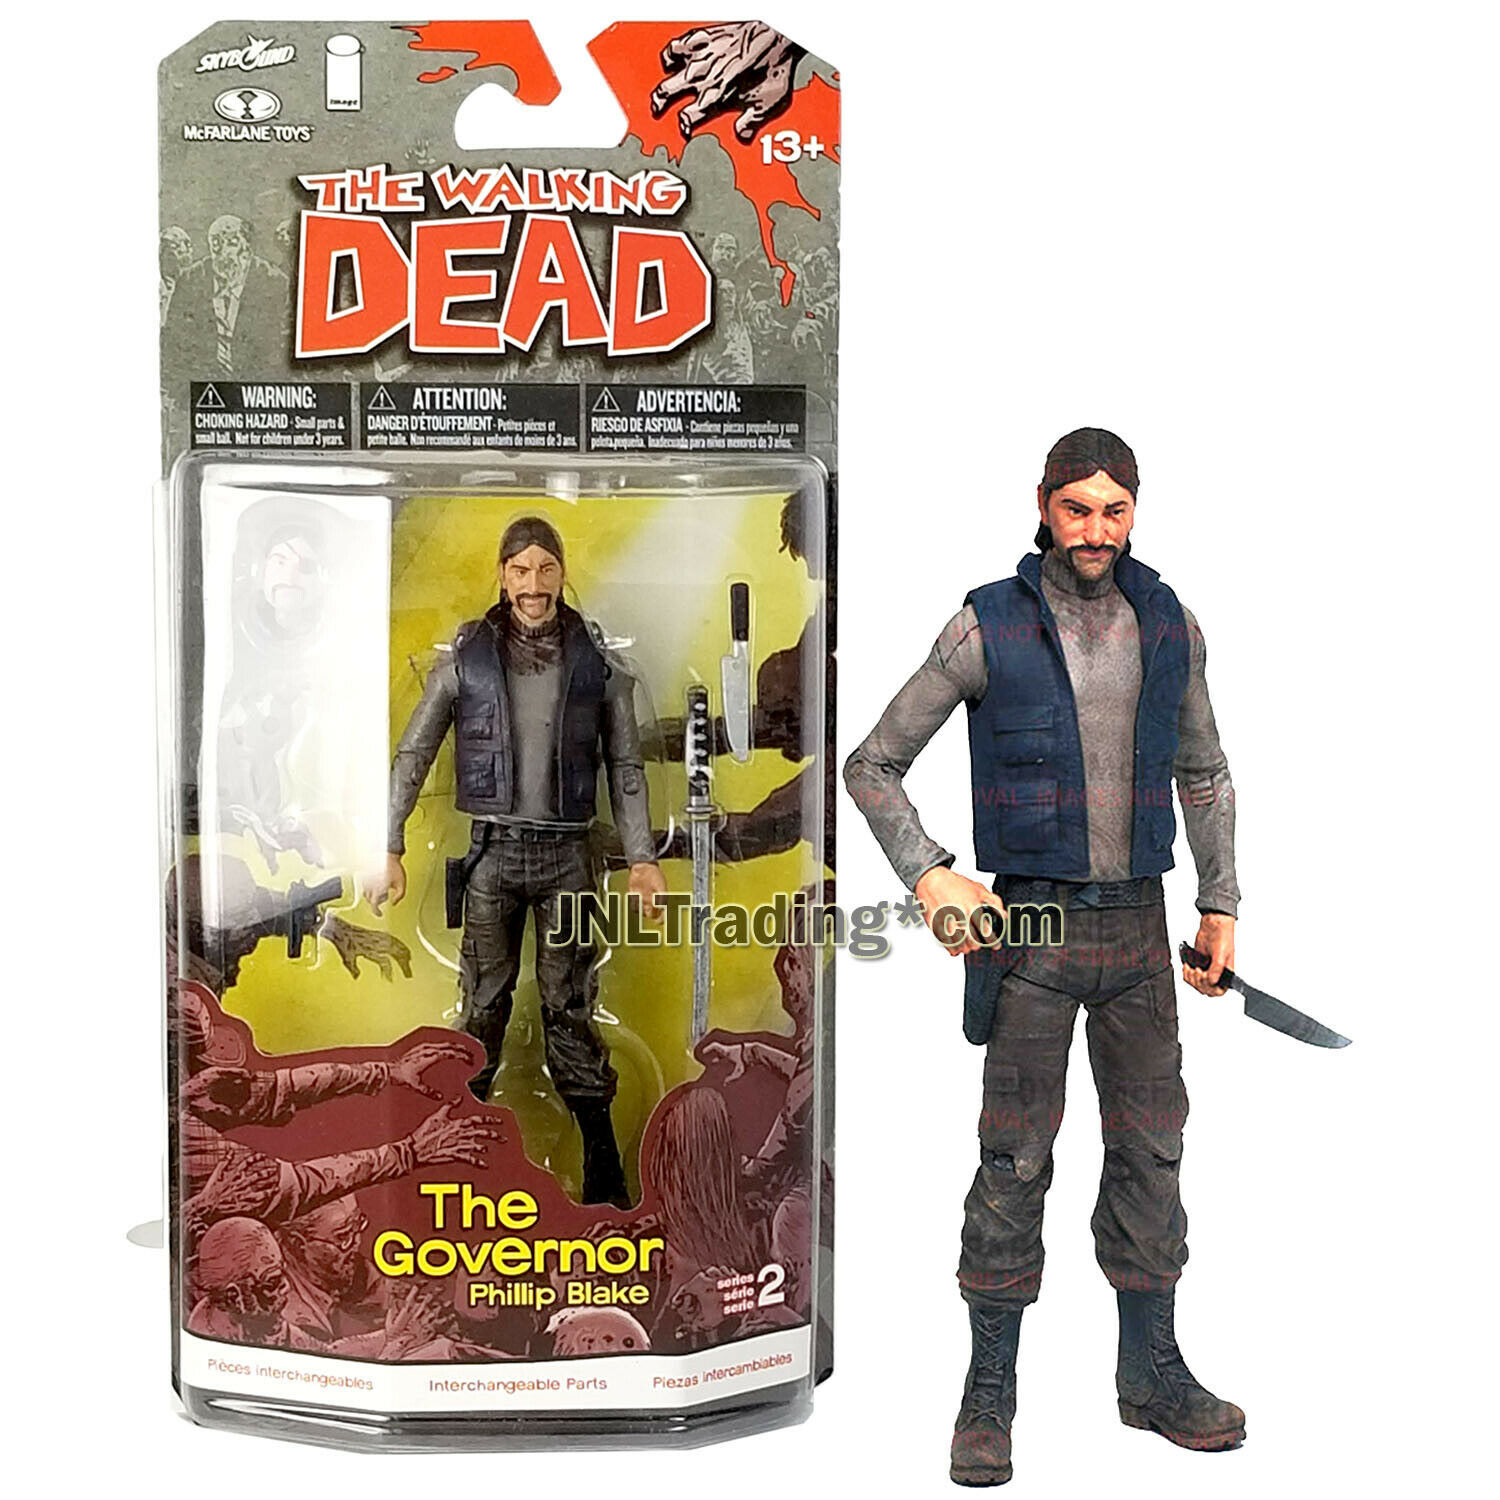 Primary image for Year 2013 AMC TV Series Walking Dead 5 Inch Figure - THE GOVERNOR PHILLIP BLAKE